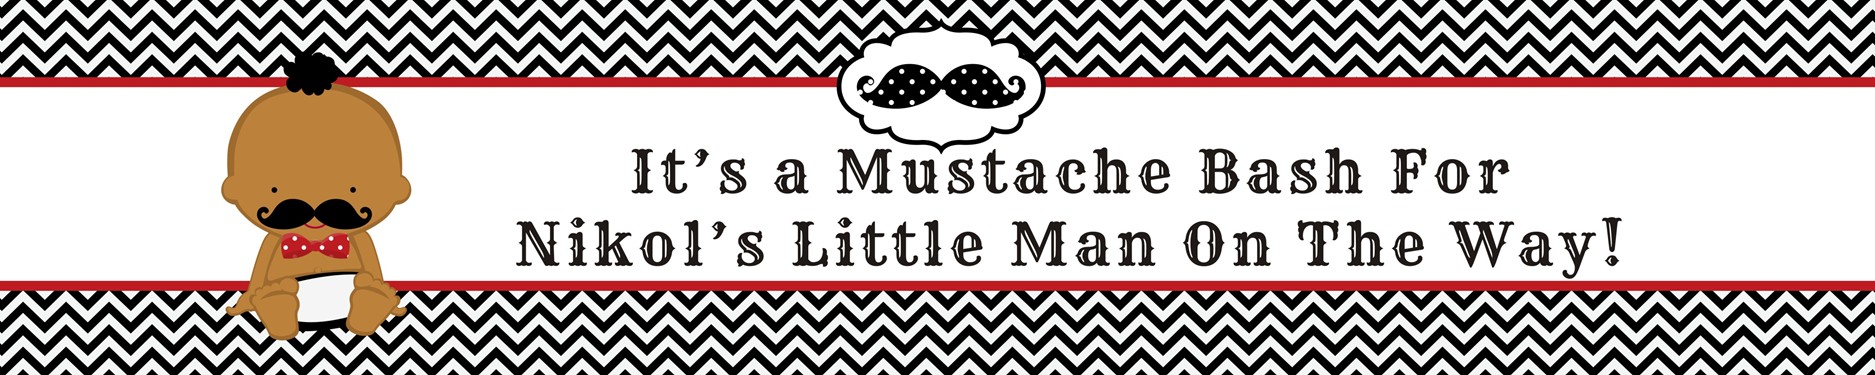  Little Man Mustache Black/Grey - Personalized Baby Shower Banners Caucasian